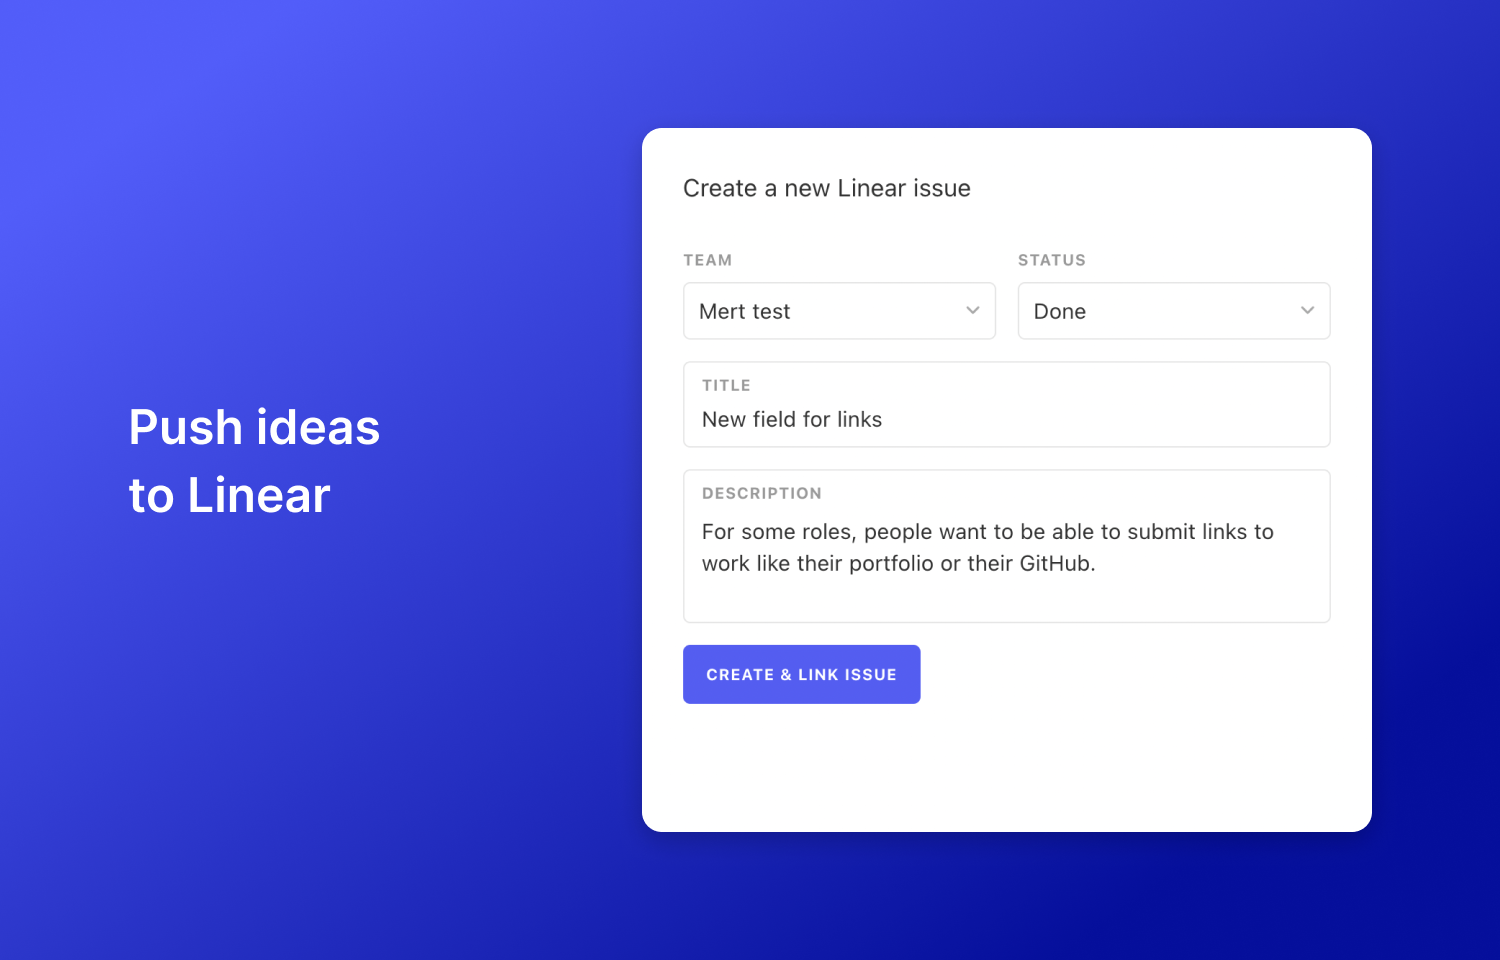 A modal for creating a Linear issue from Canny alongside text that says, "Push ideas to Linear."